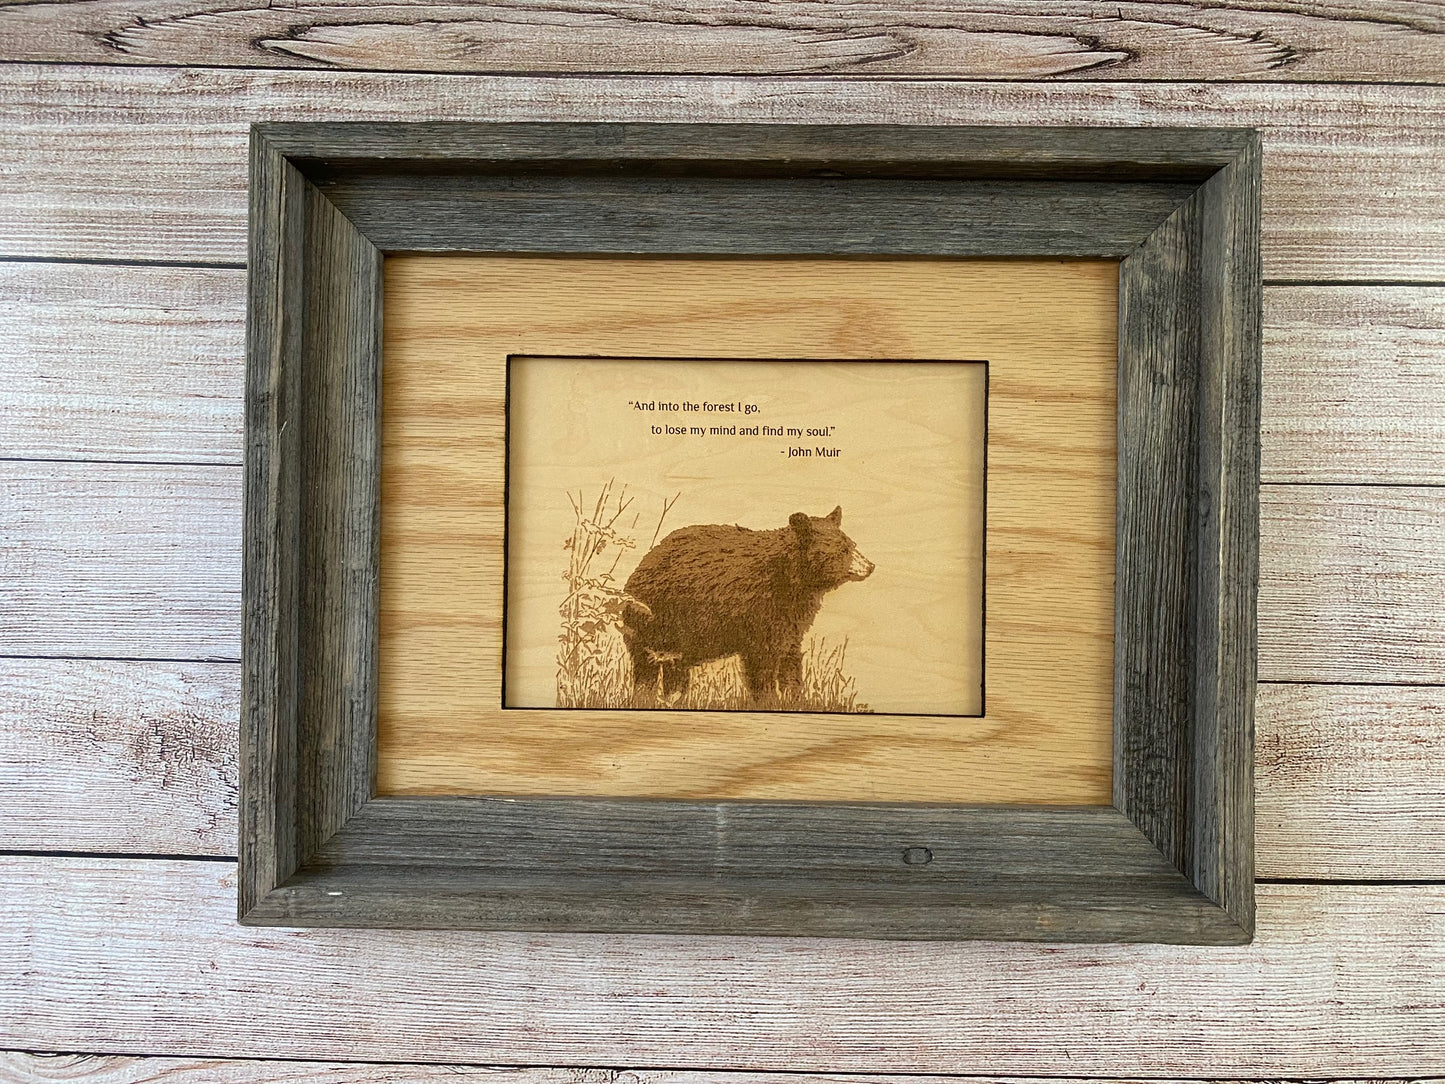 "And into the forest I go, to lose my mind and find my soul" - John Muir Bear in nature matted, framed picture